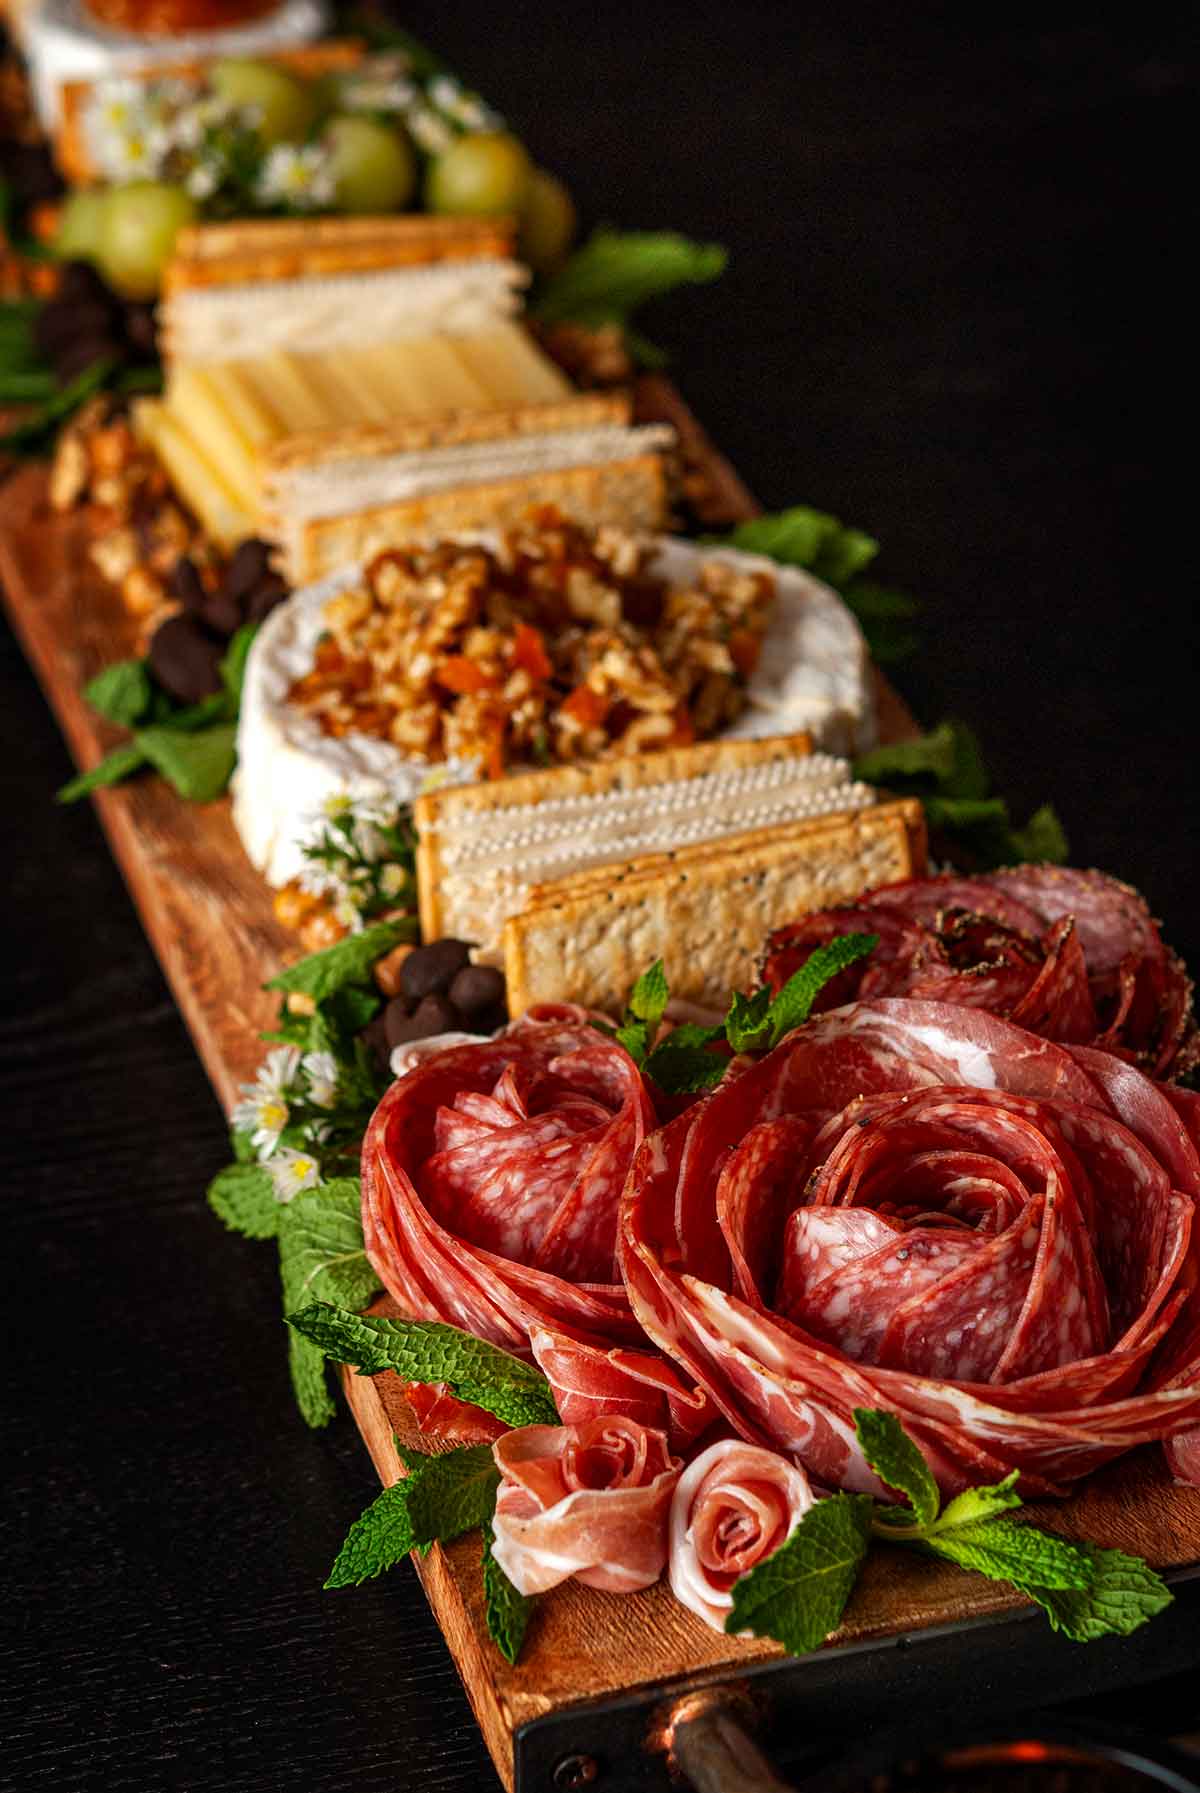 An ornate cheese board with meat roses, 2 cheeses, crackers and grapes.